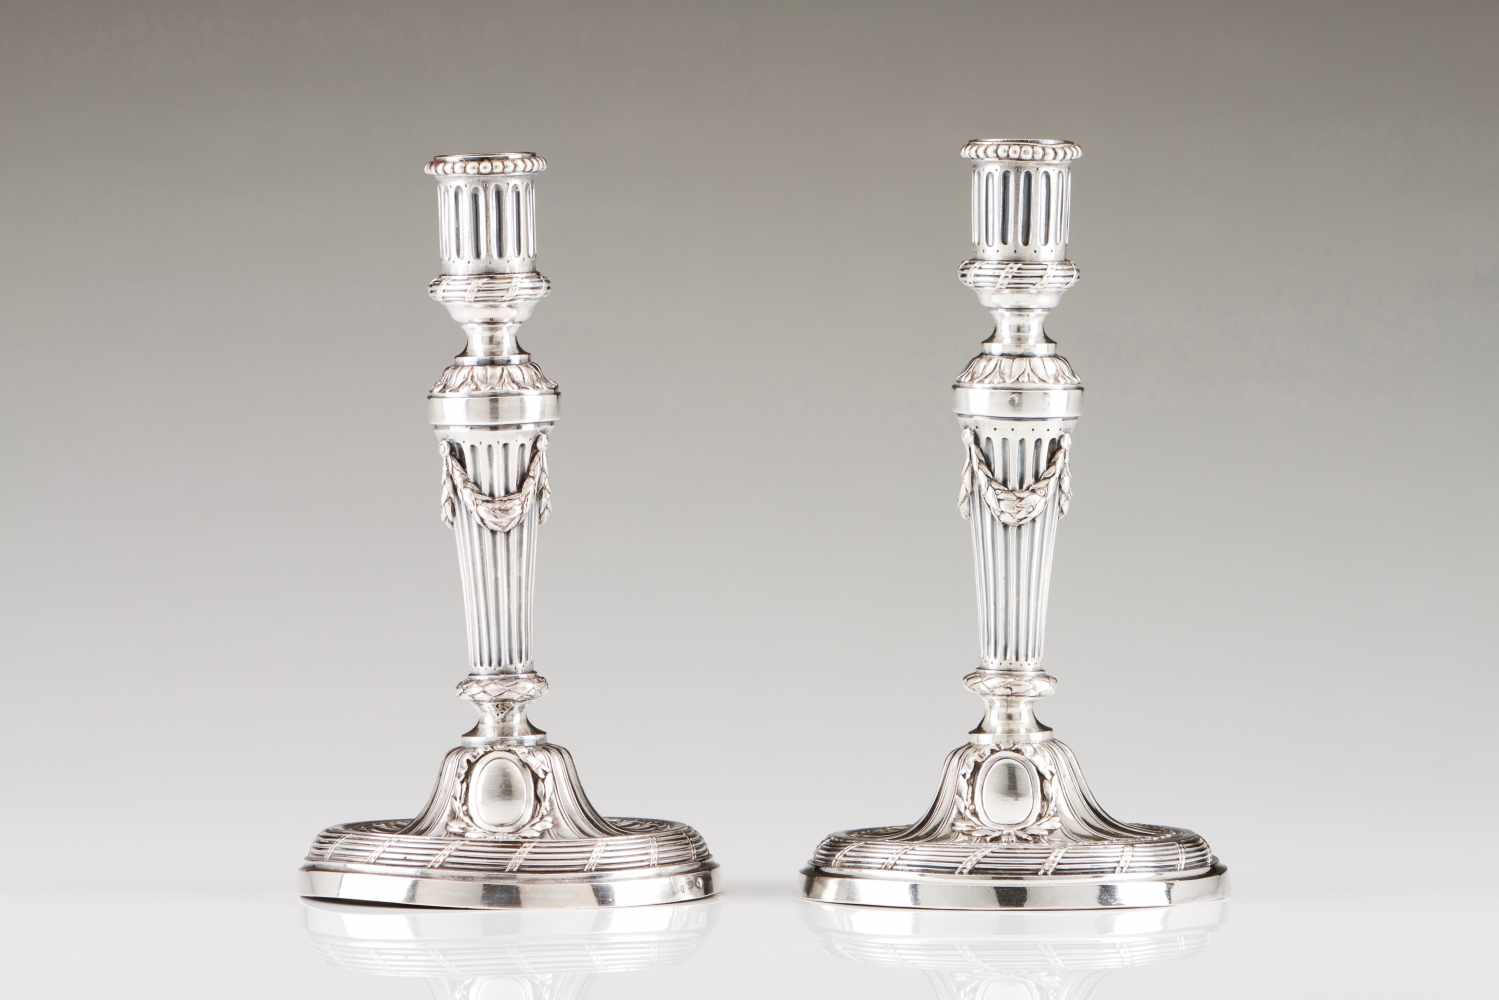 A pair of candlestands18th c. French silverLouis XVI fluted and flower garland decorationParis assay